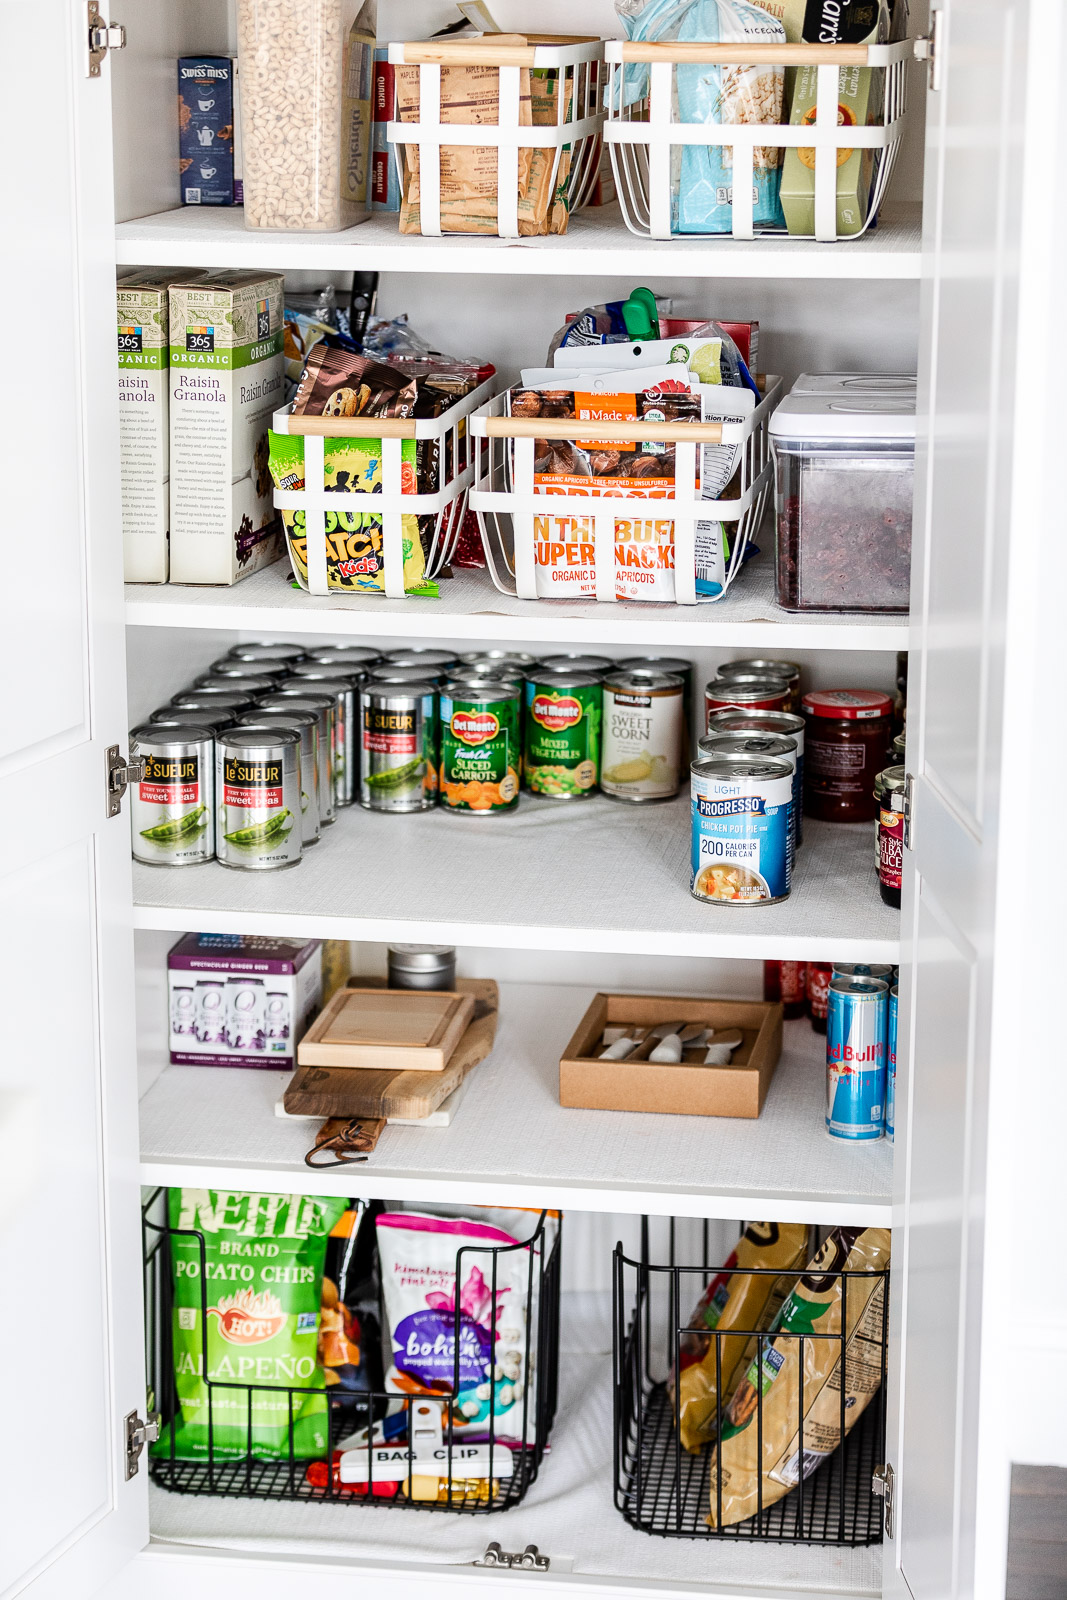 https://www.theglamorousgal.com/wp-content/uploads/2021/03/pantry-organization-after-with-container-store-The-Glamorous-Gal.jpg